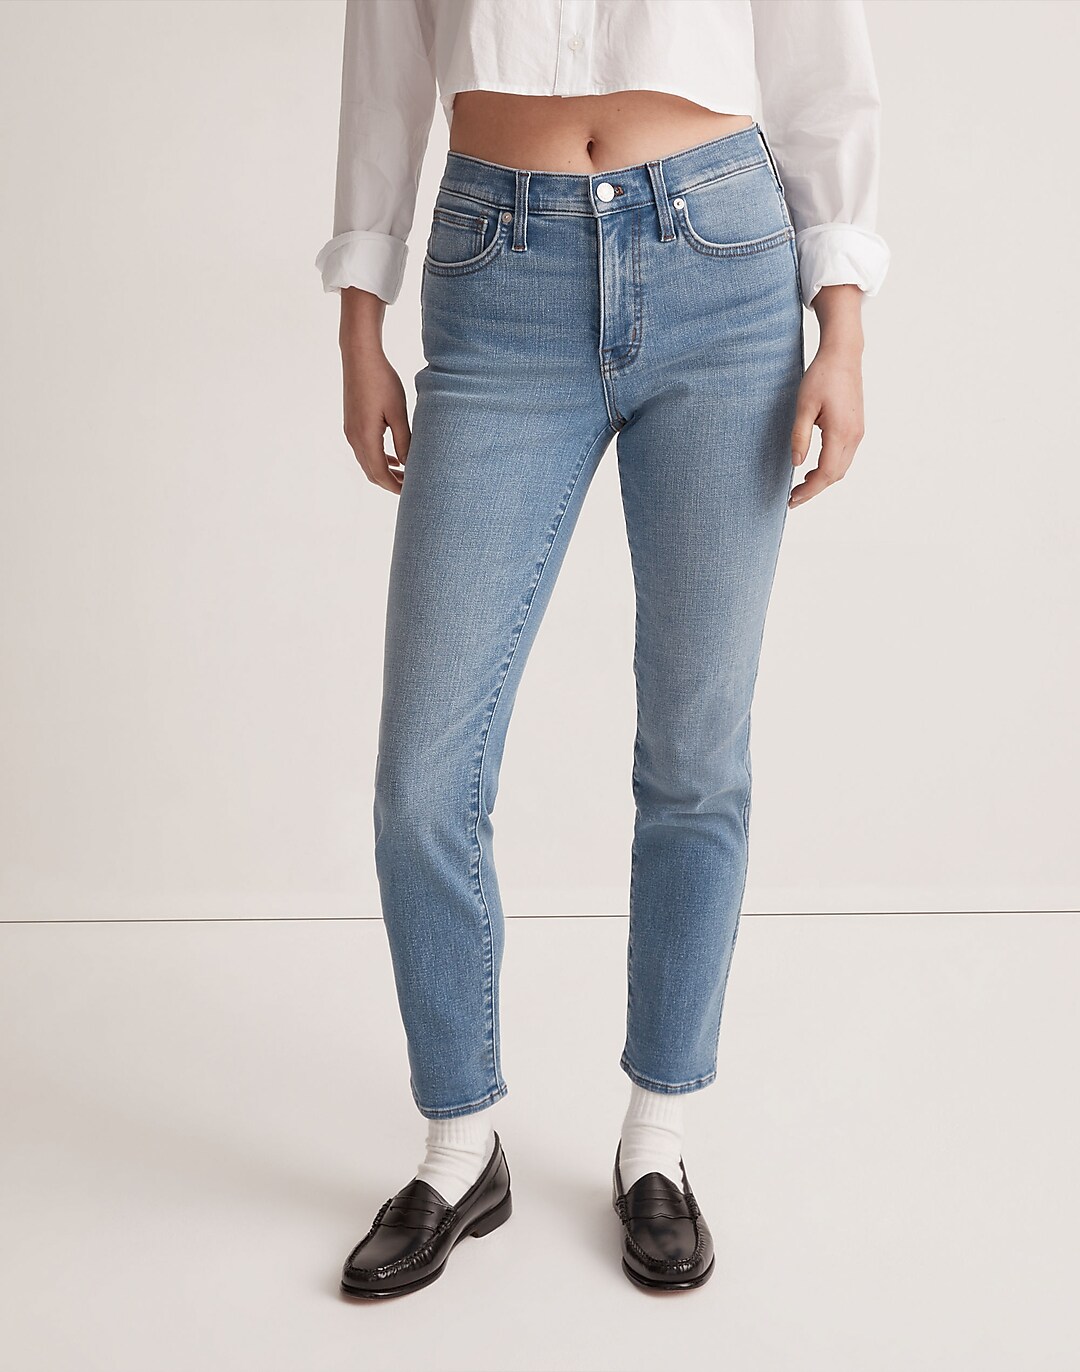 Mid-Rise Stovepipe Jeans in Skyford Wash